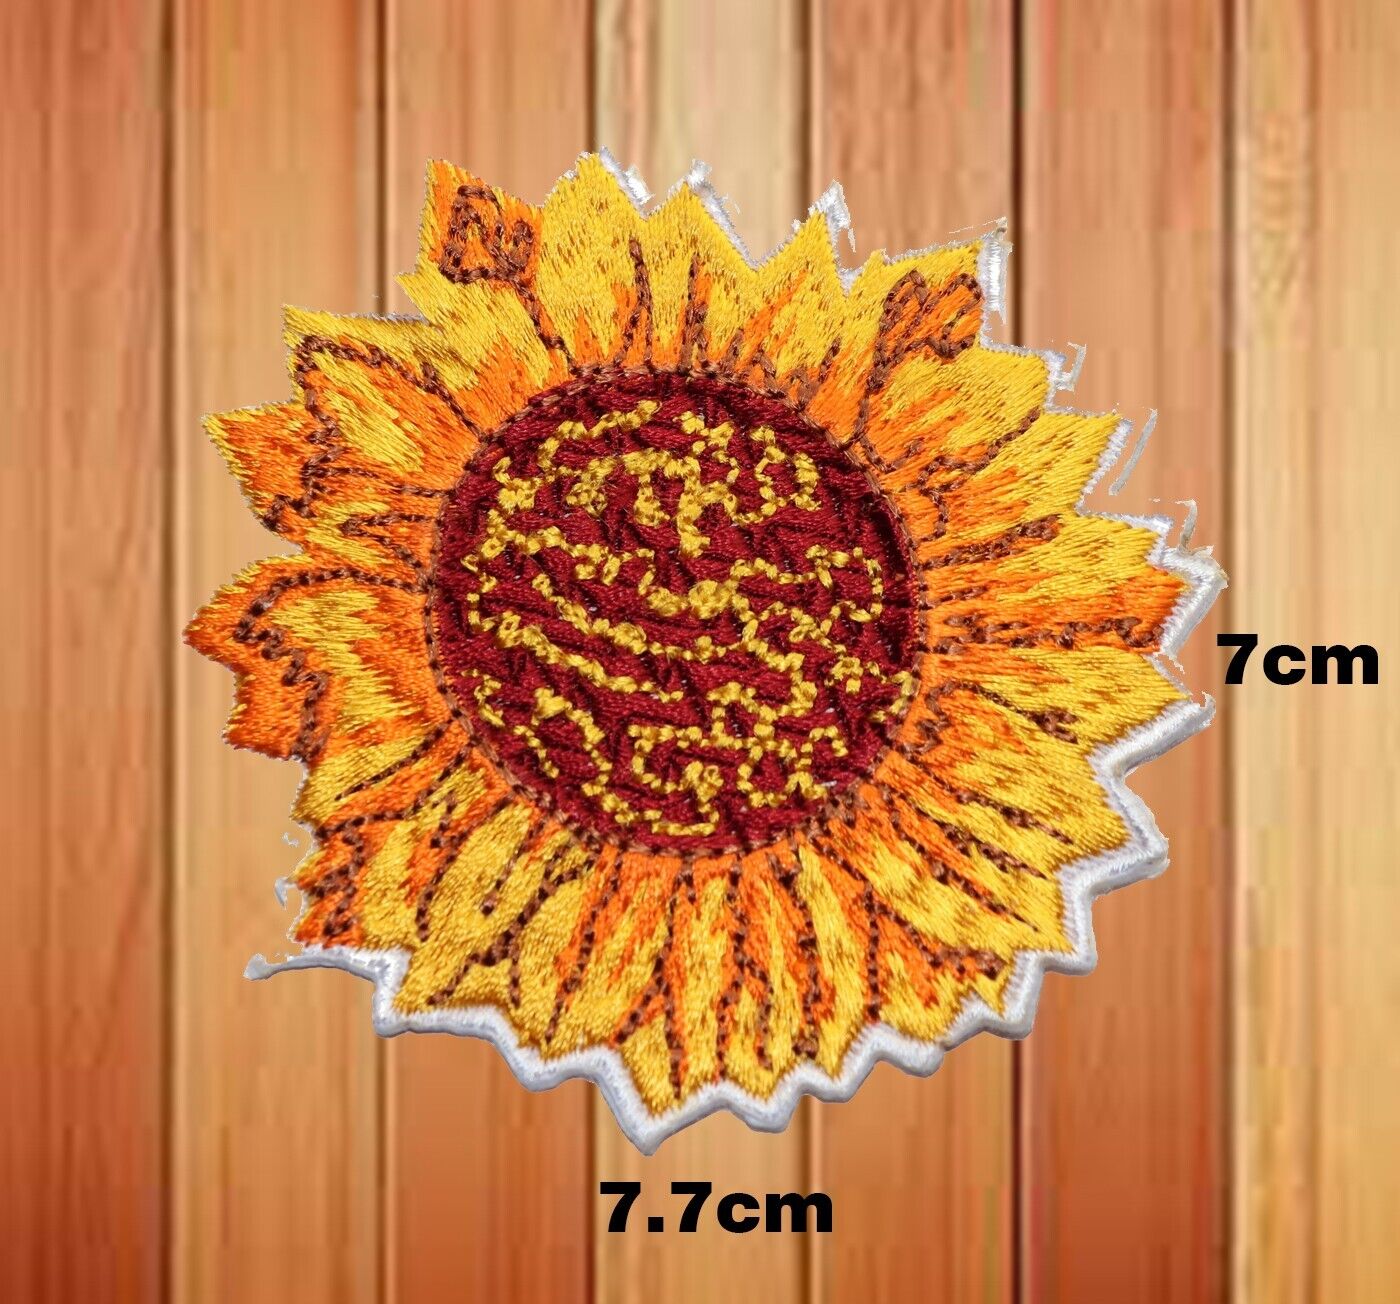 SUNFLOWER EMBROIDERED IRON OR SEW ON PATCHES APPLIQUE LOGO BADGE